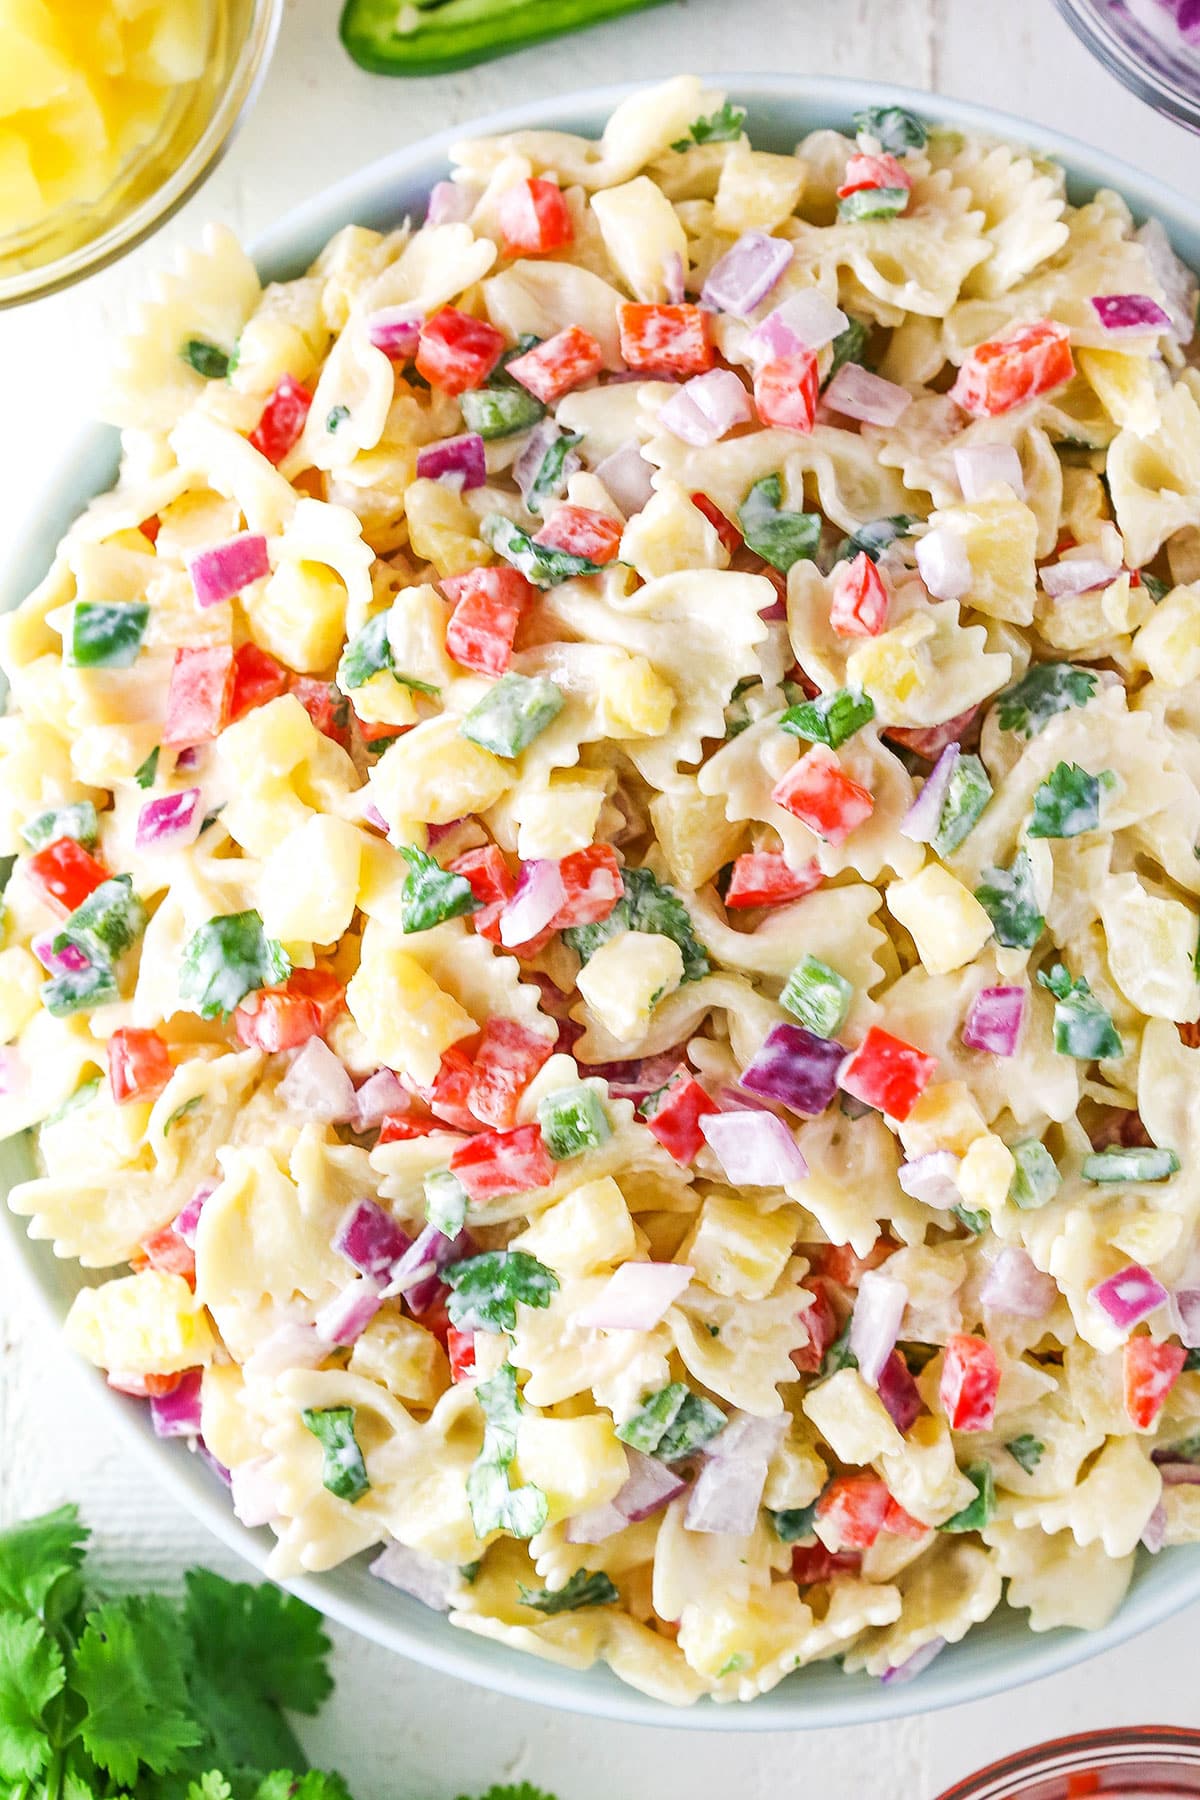 Overhead view of Pineapple Salsa Pasta Salad in a white bowl on a white table